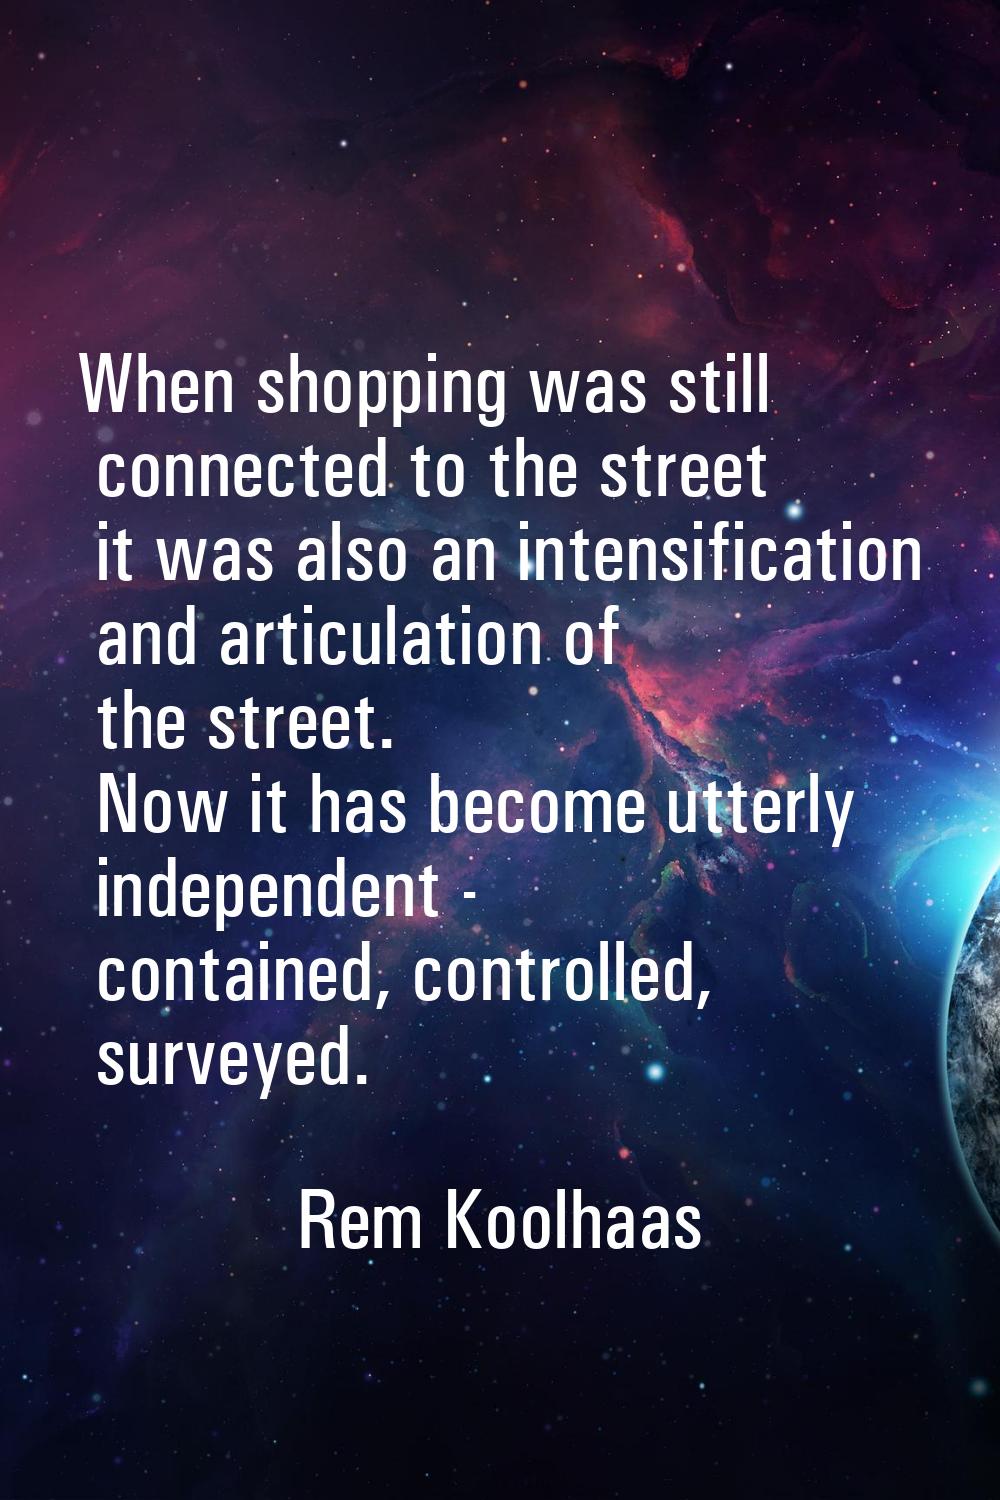 When shopping was still connected to the street it was also an intensification and articulation of 